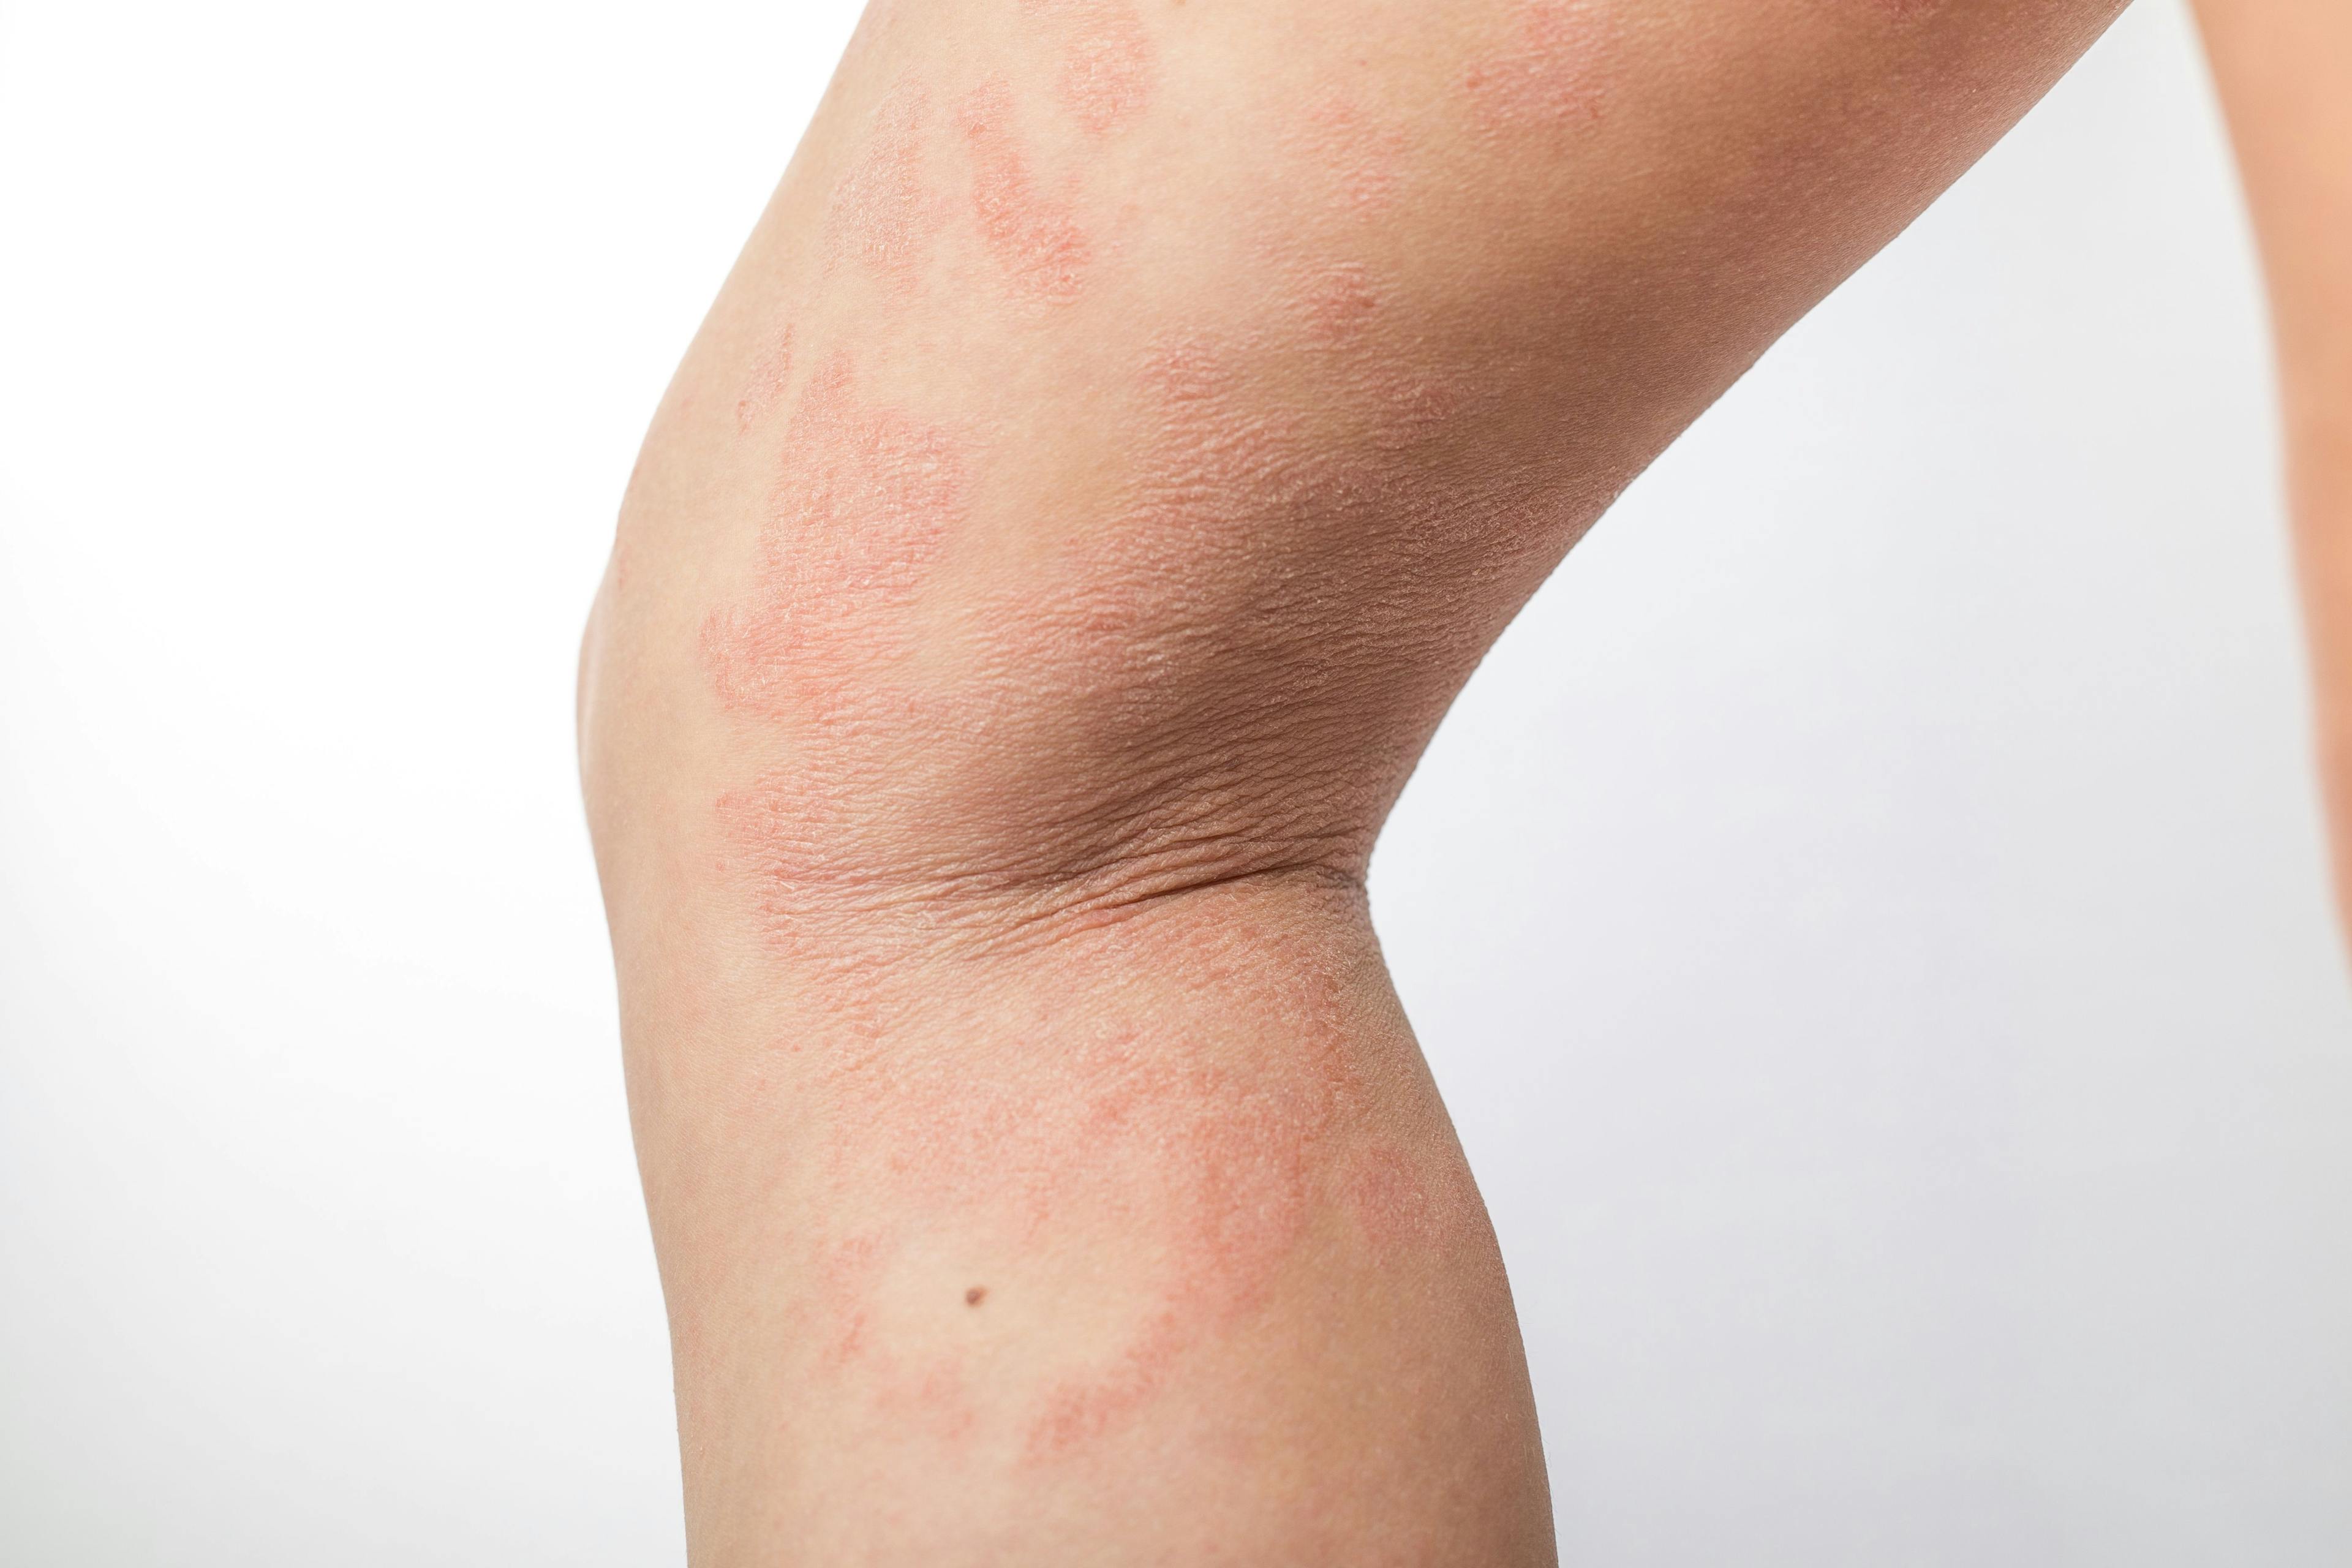 Delgocitinib Effective in Treatment of Mild to Moderate Atopic Dermatitis